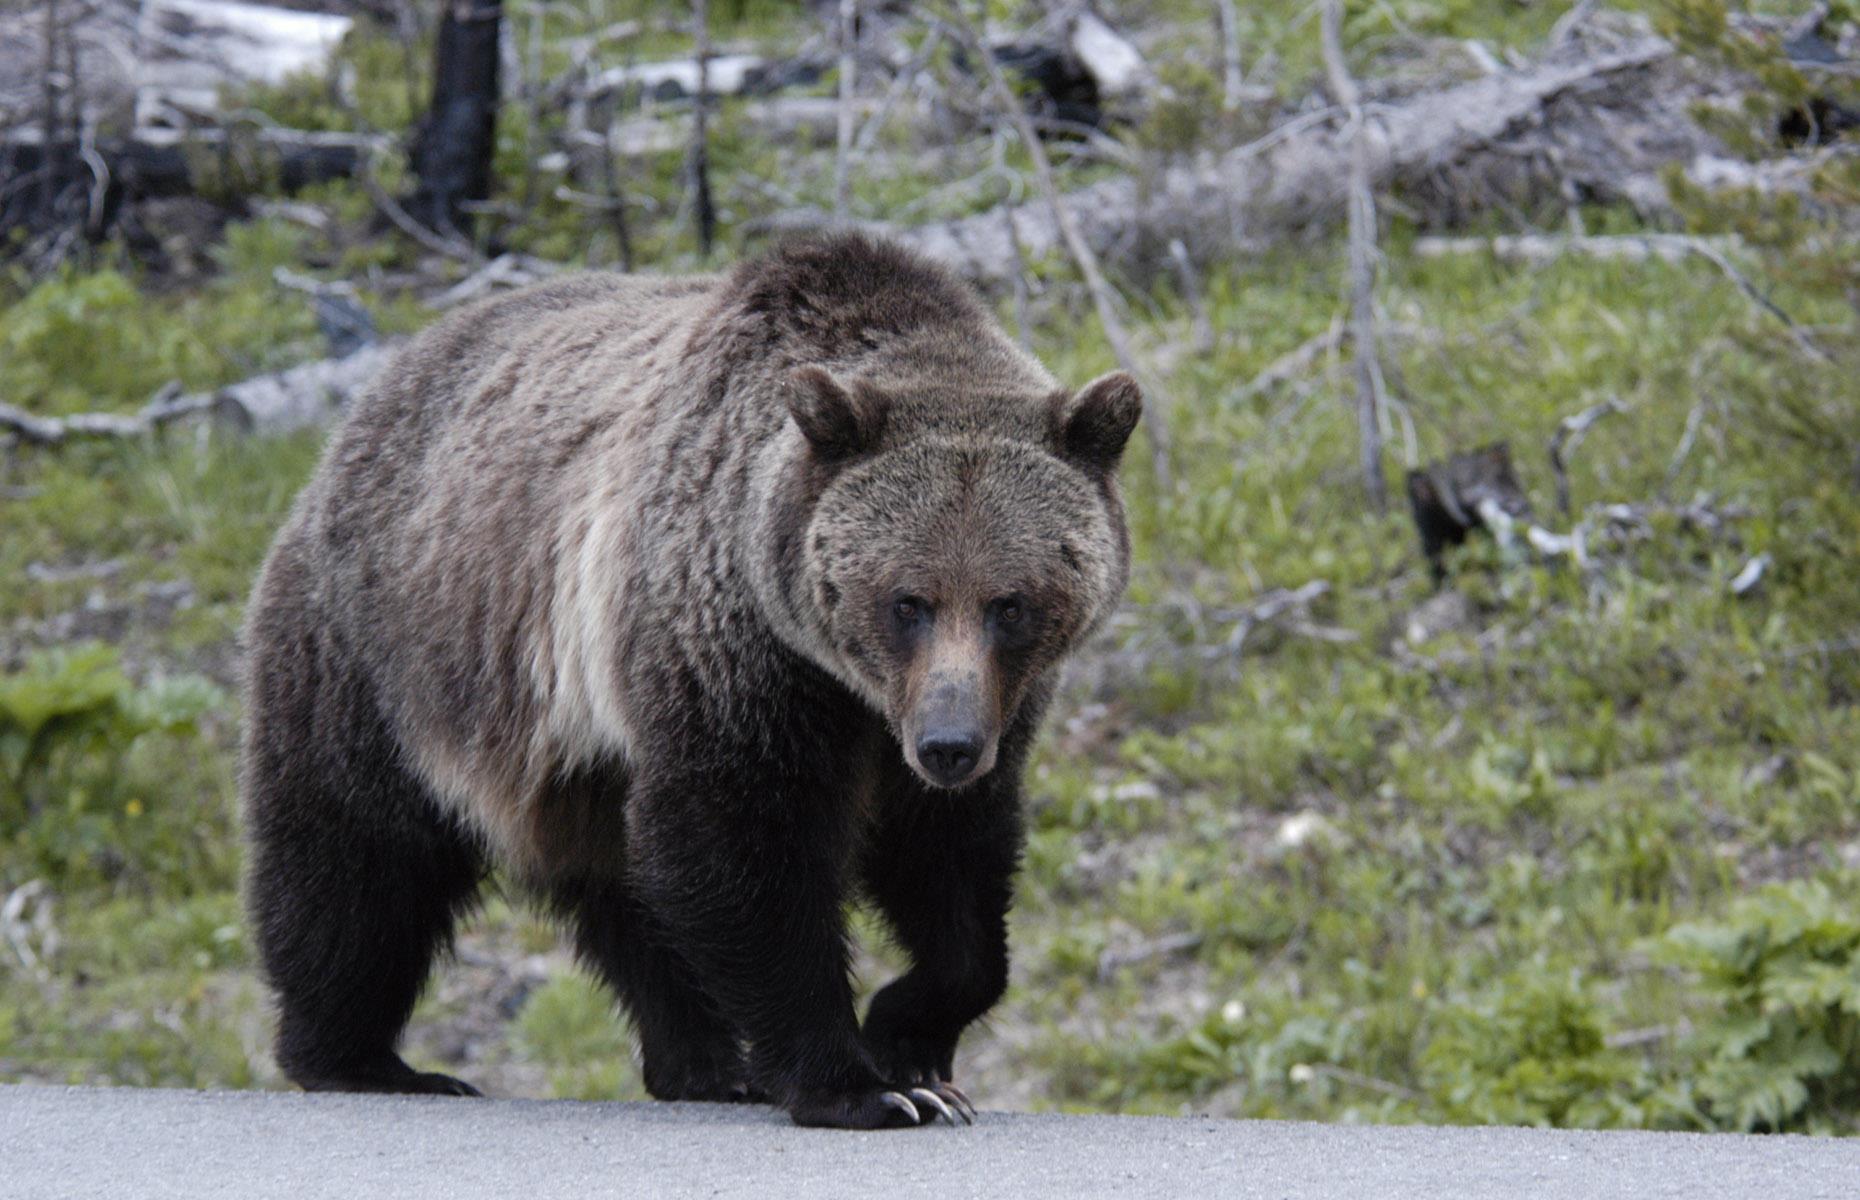 The Noughties brought in some good news stories for the park's wildlife too. In 2007, Yellowstone's grizzly bear population was removed from the threatened species list. Habit loss and accidents involving humans had caused their numbers to plunge, but careful management programs allowed populations to grow once more. A hulking grizzly bear is seen lumbering along a road near the East Entrance in 2005.